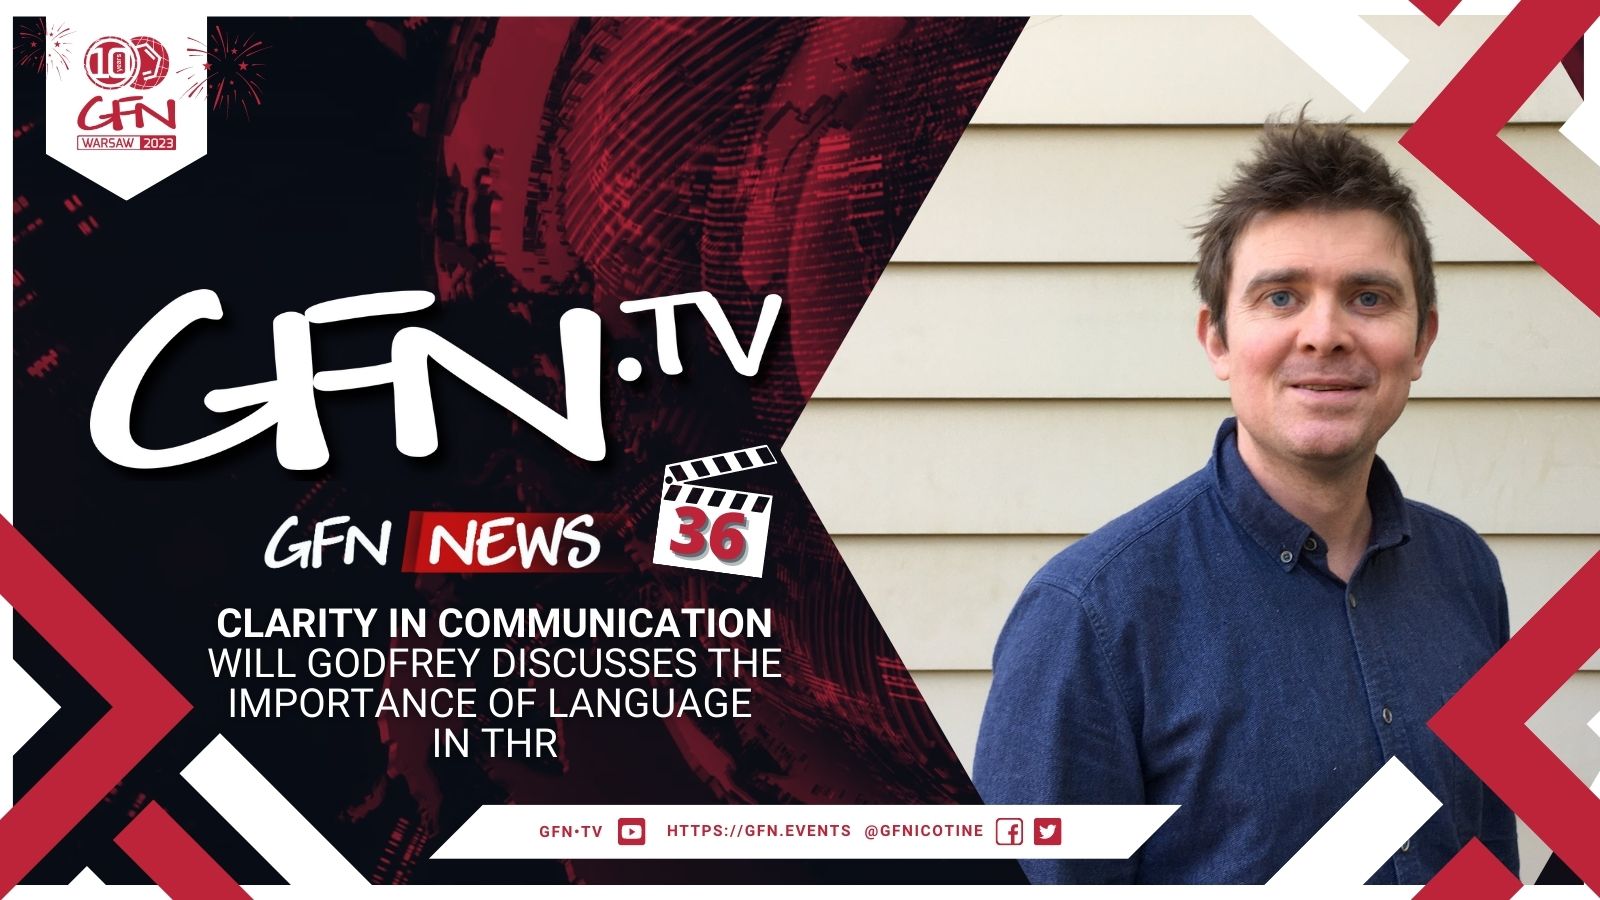 GFN News #36 | CLARITY IN COMMUNICATION | Will Godfrey discusses the importance of language in THR